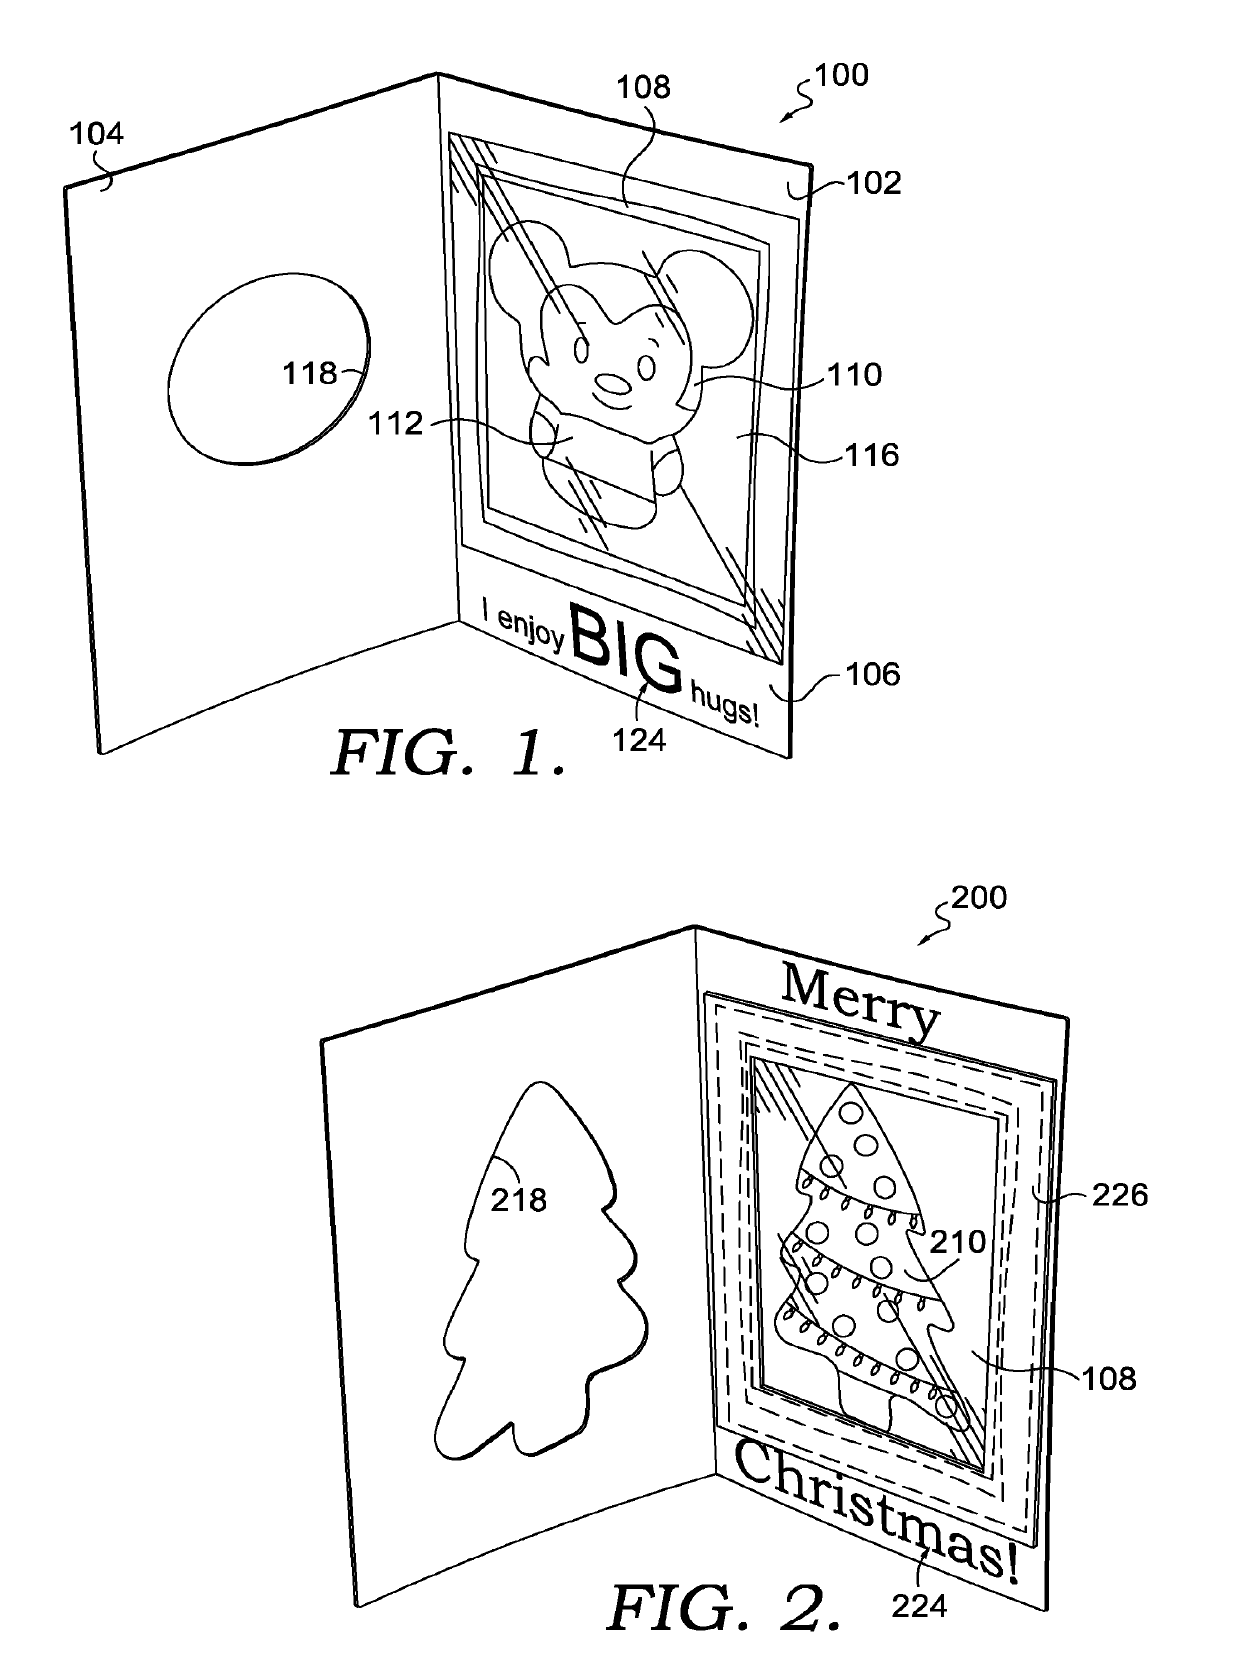 Greeting Card Having Compressed Object Therein and Method of Selectively Controlling Deformation Thereof